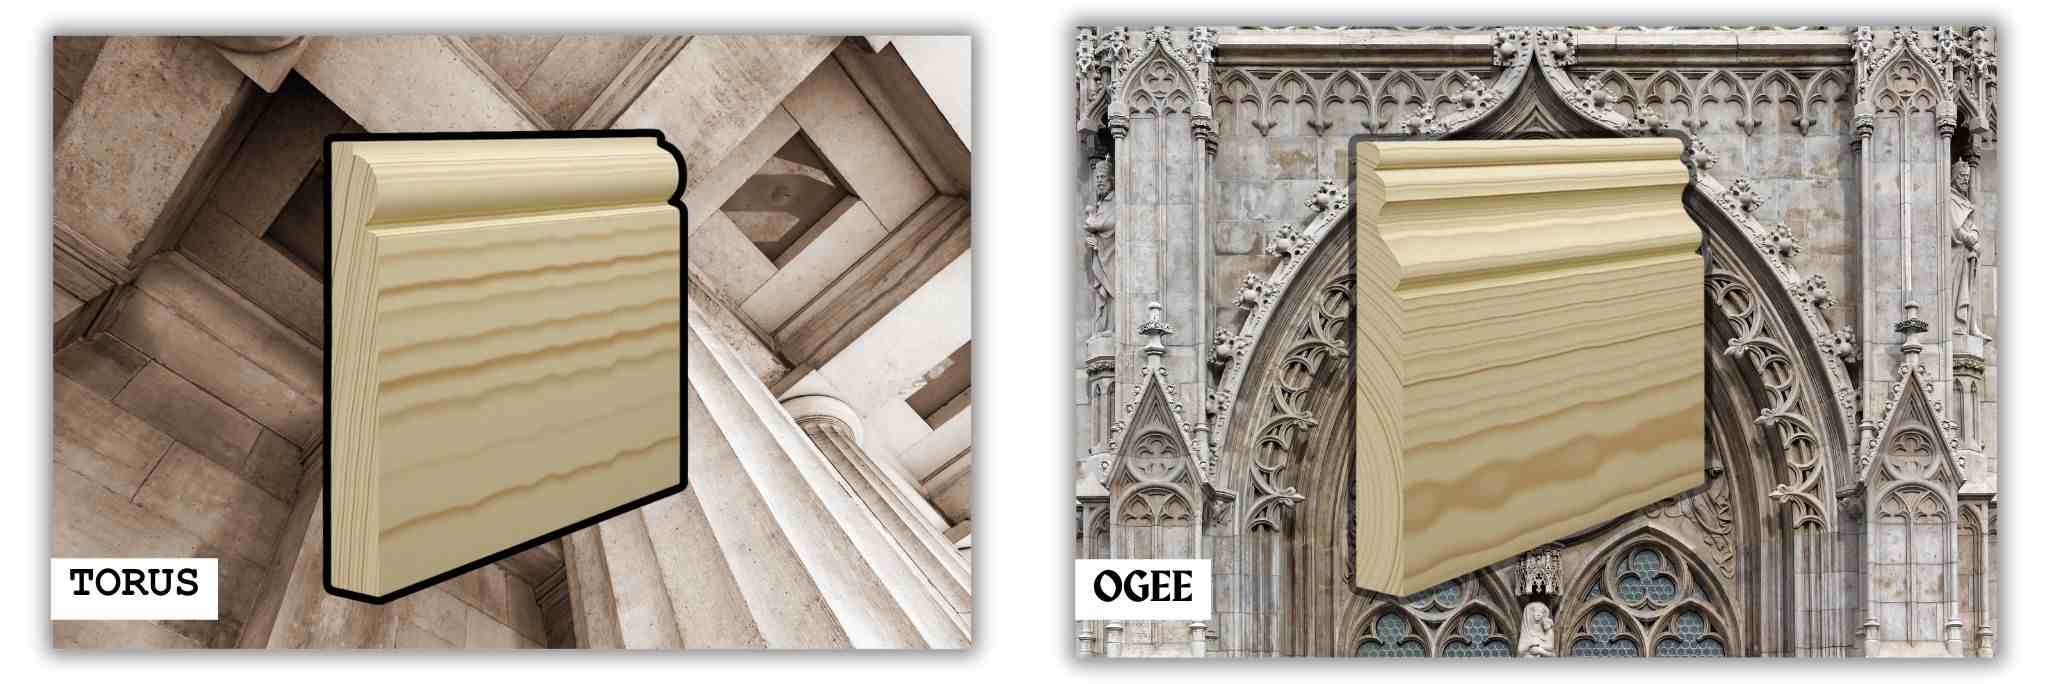 Image shows a comparison of Pine Torus Skirting and Pine Ogee Skirting